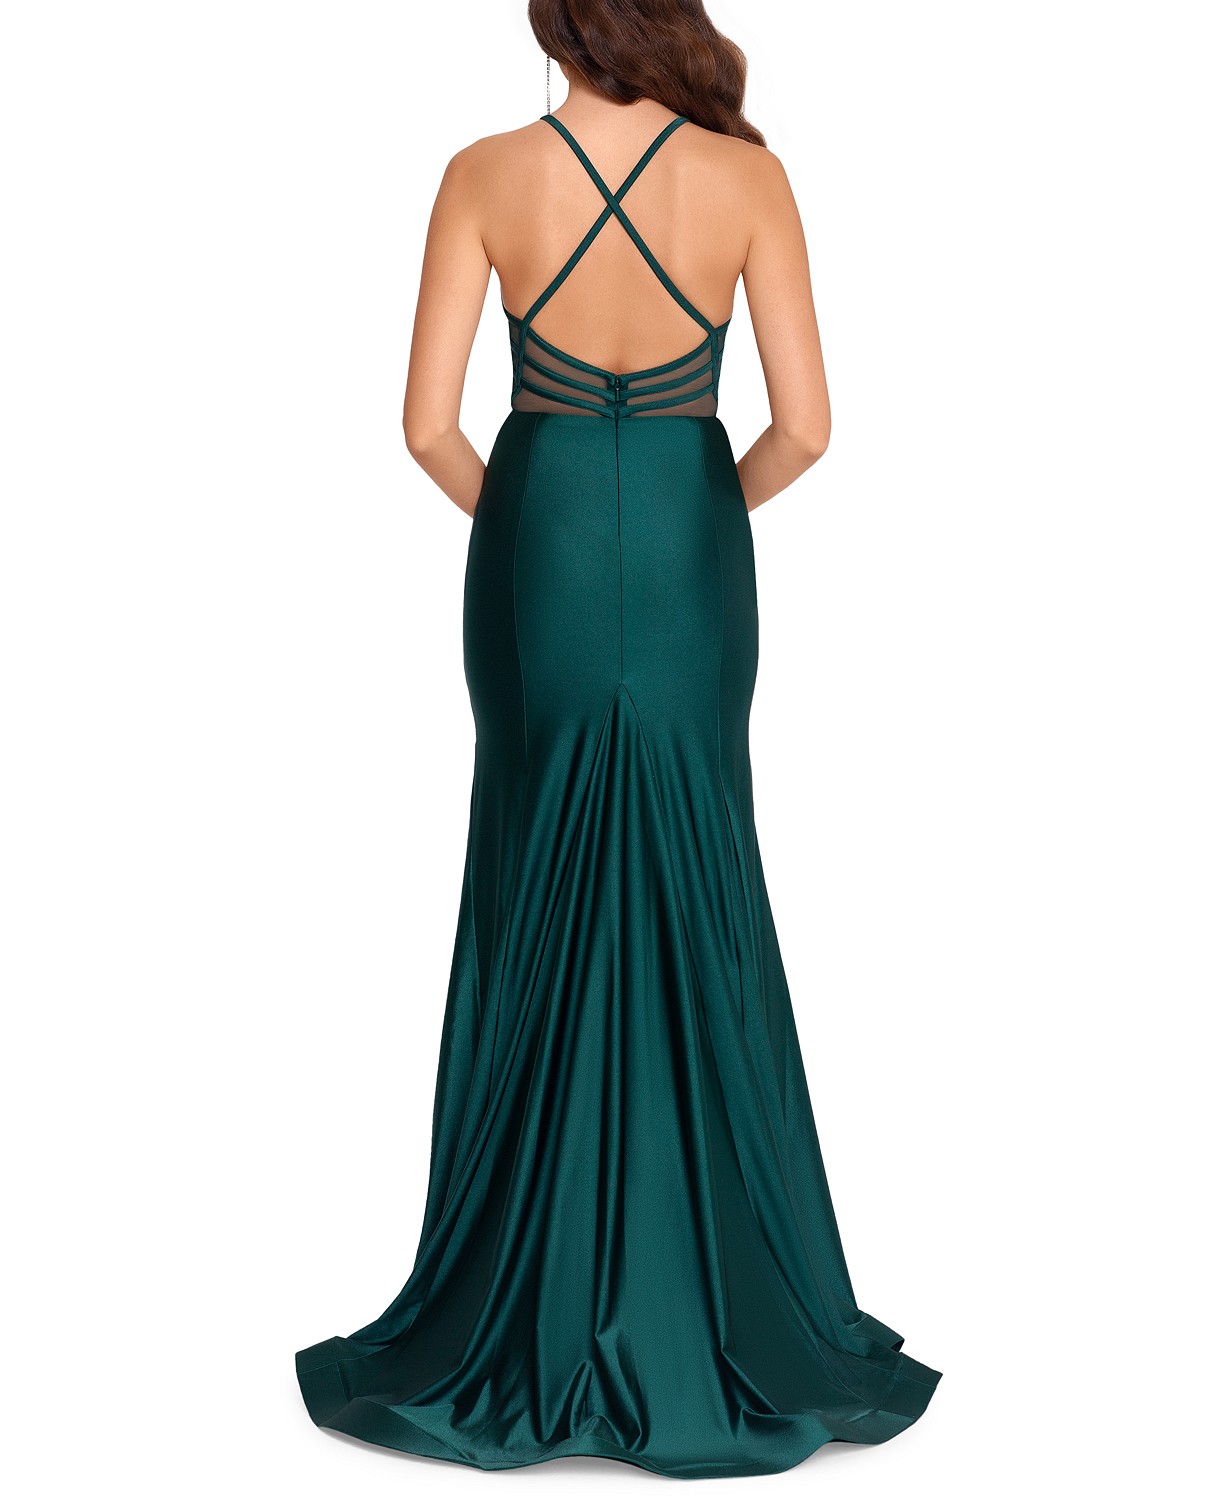 Macy's Juniors strappy-back Mermaid Gown Hunter color back-side